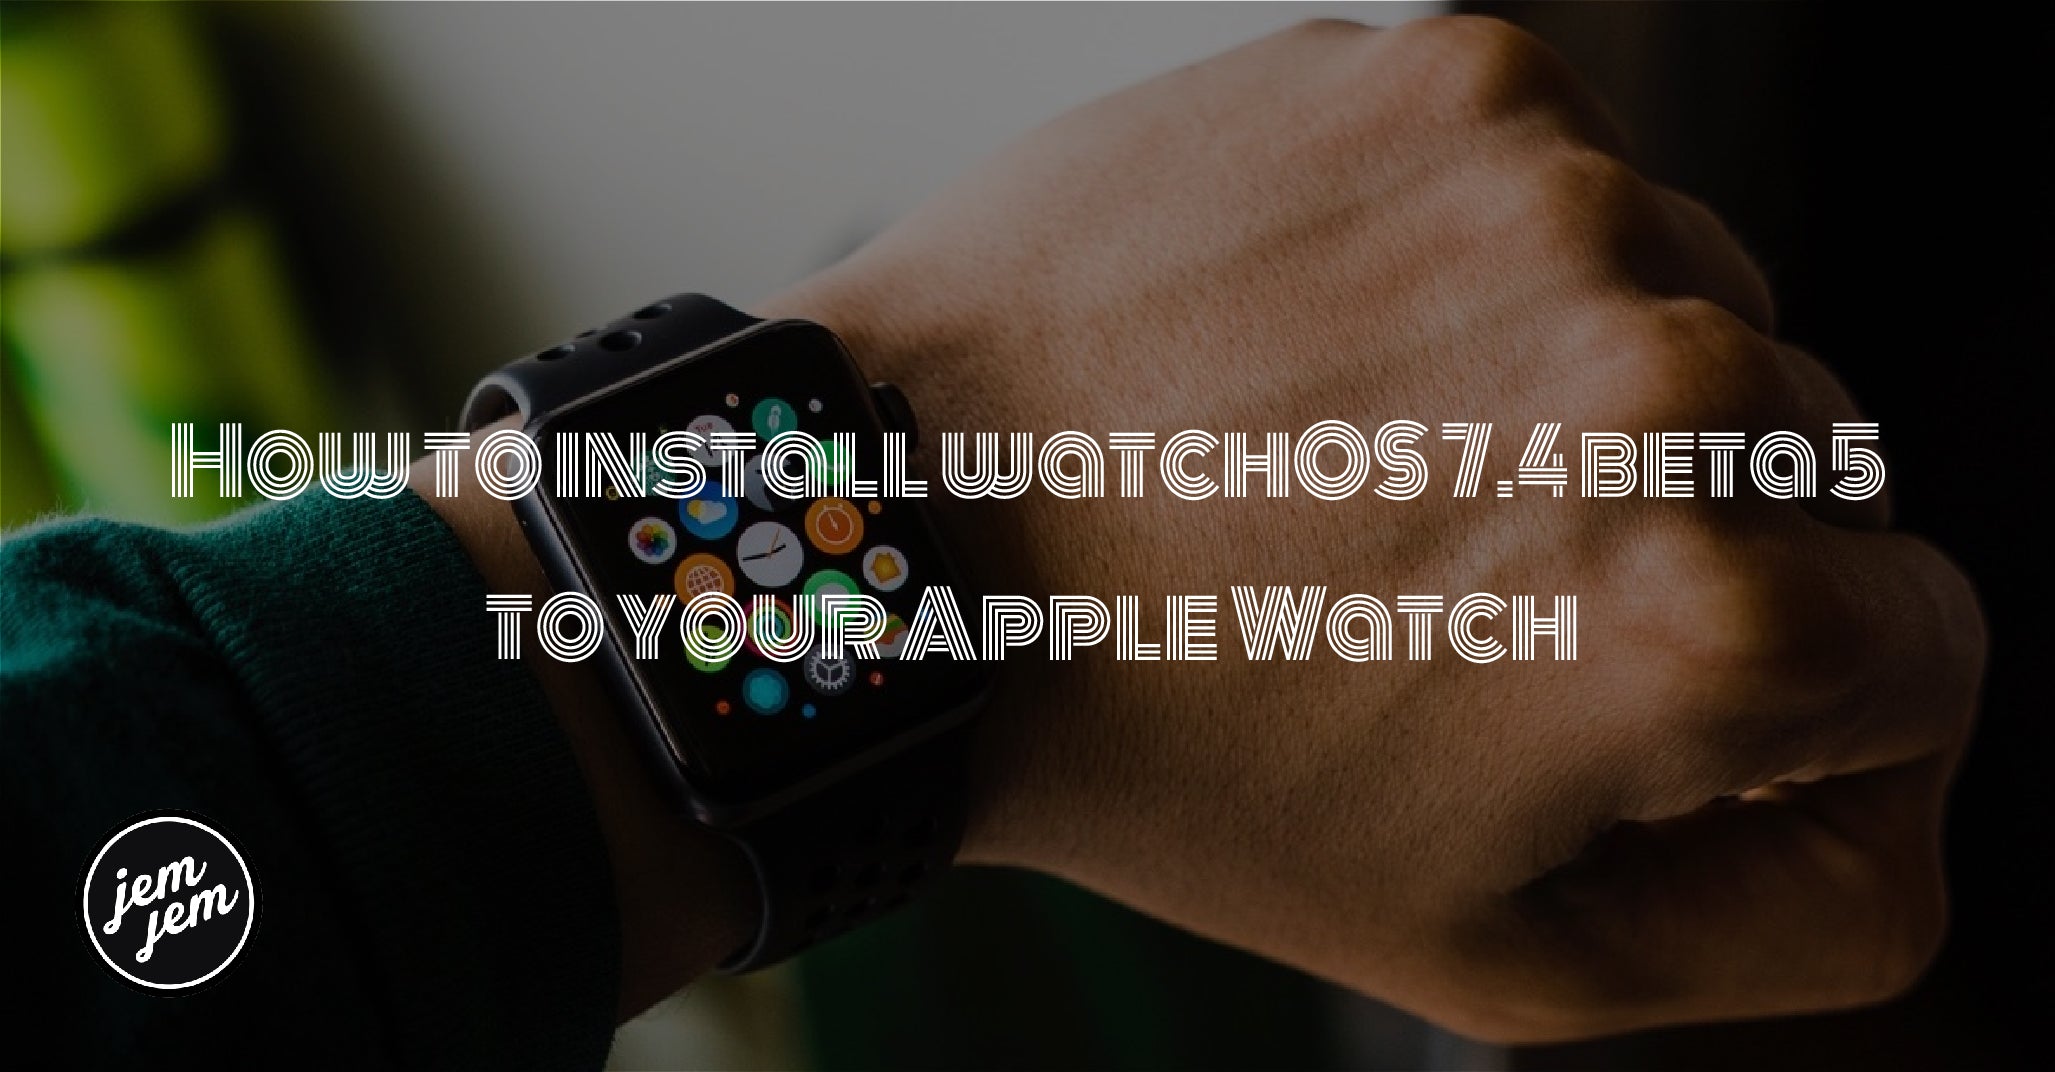 How to install watchOS 7.4 beta 5 to your Apple Watch